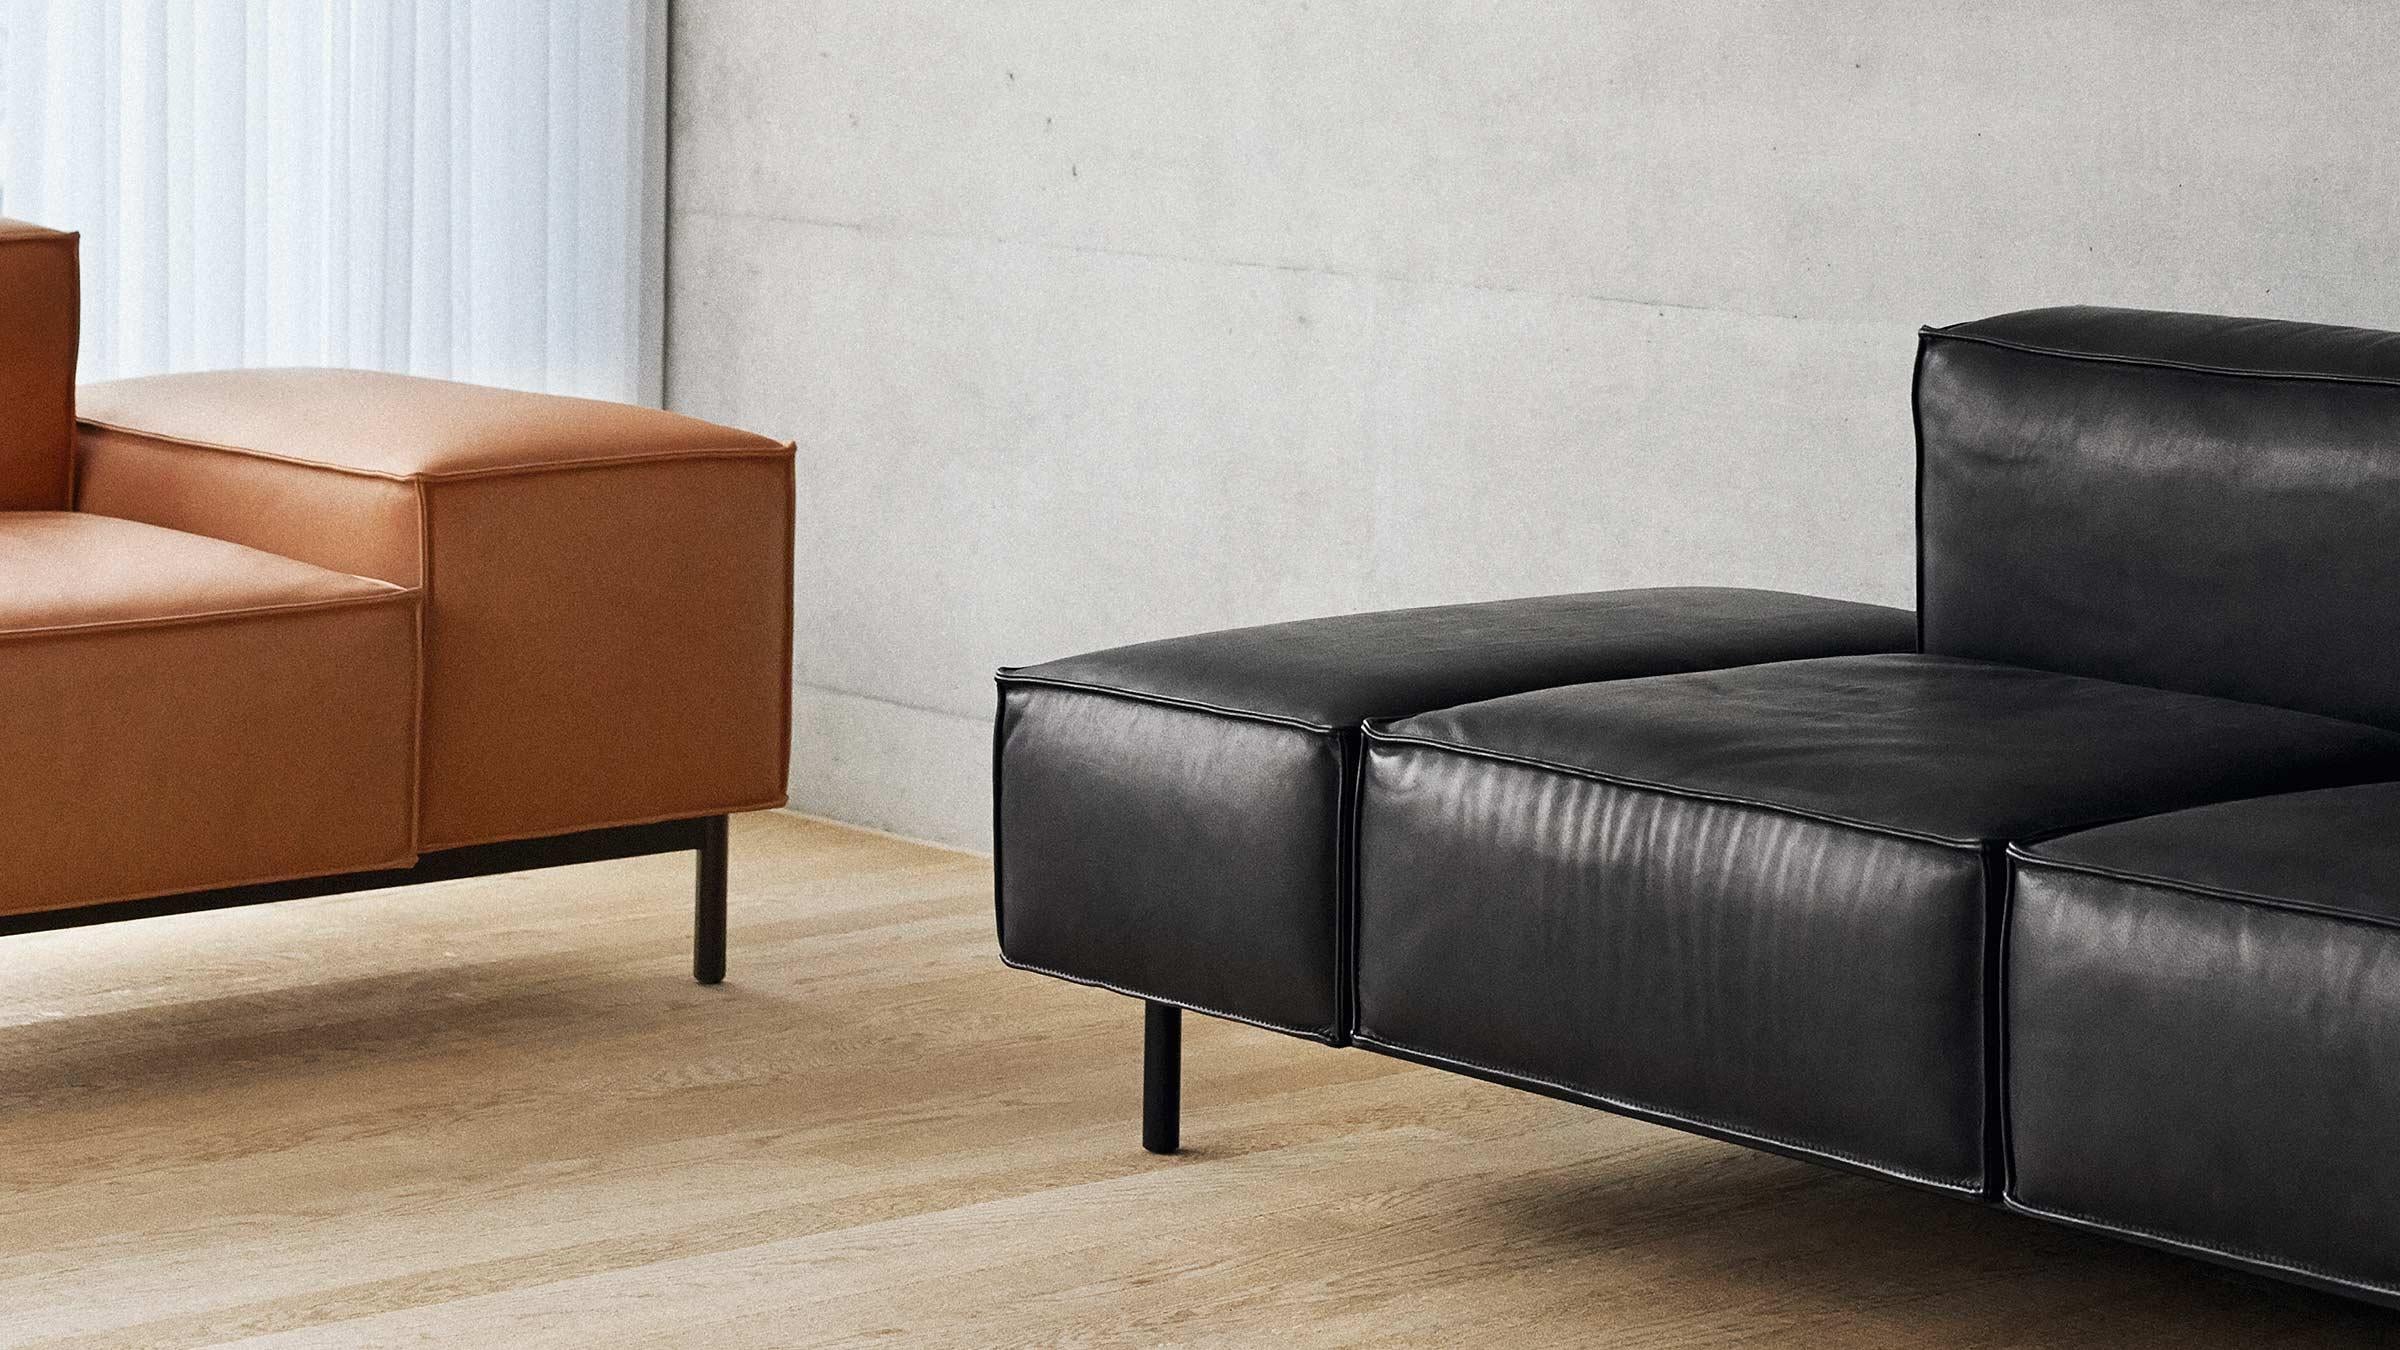 Opulent elements for modular use. The architectural structure of DS-21 is created by a metal frame that surrounds individual cushion volumes, seemingly carrying them effortlessly. The opulent elements counteract the clear lines of the frame. They